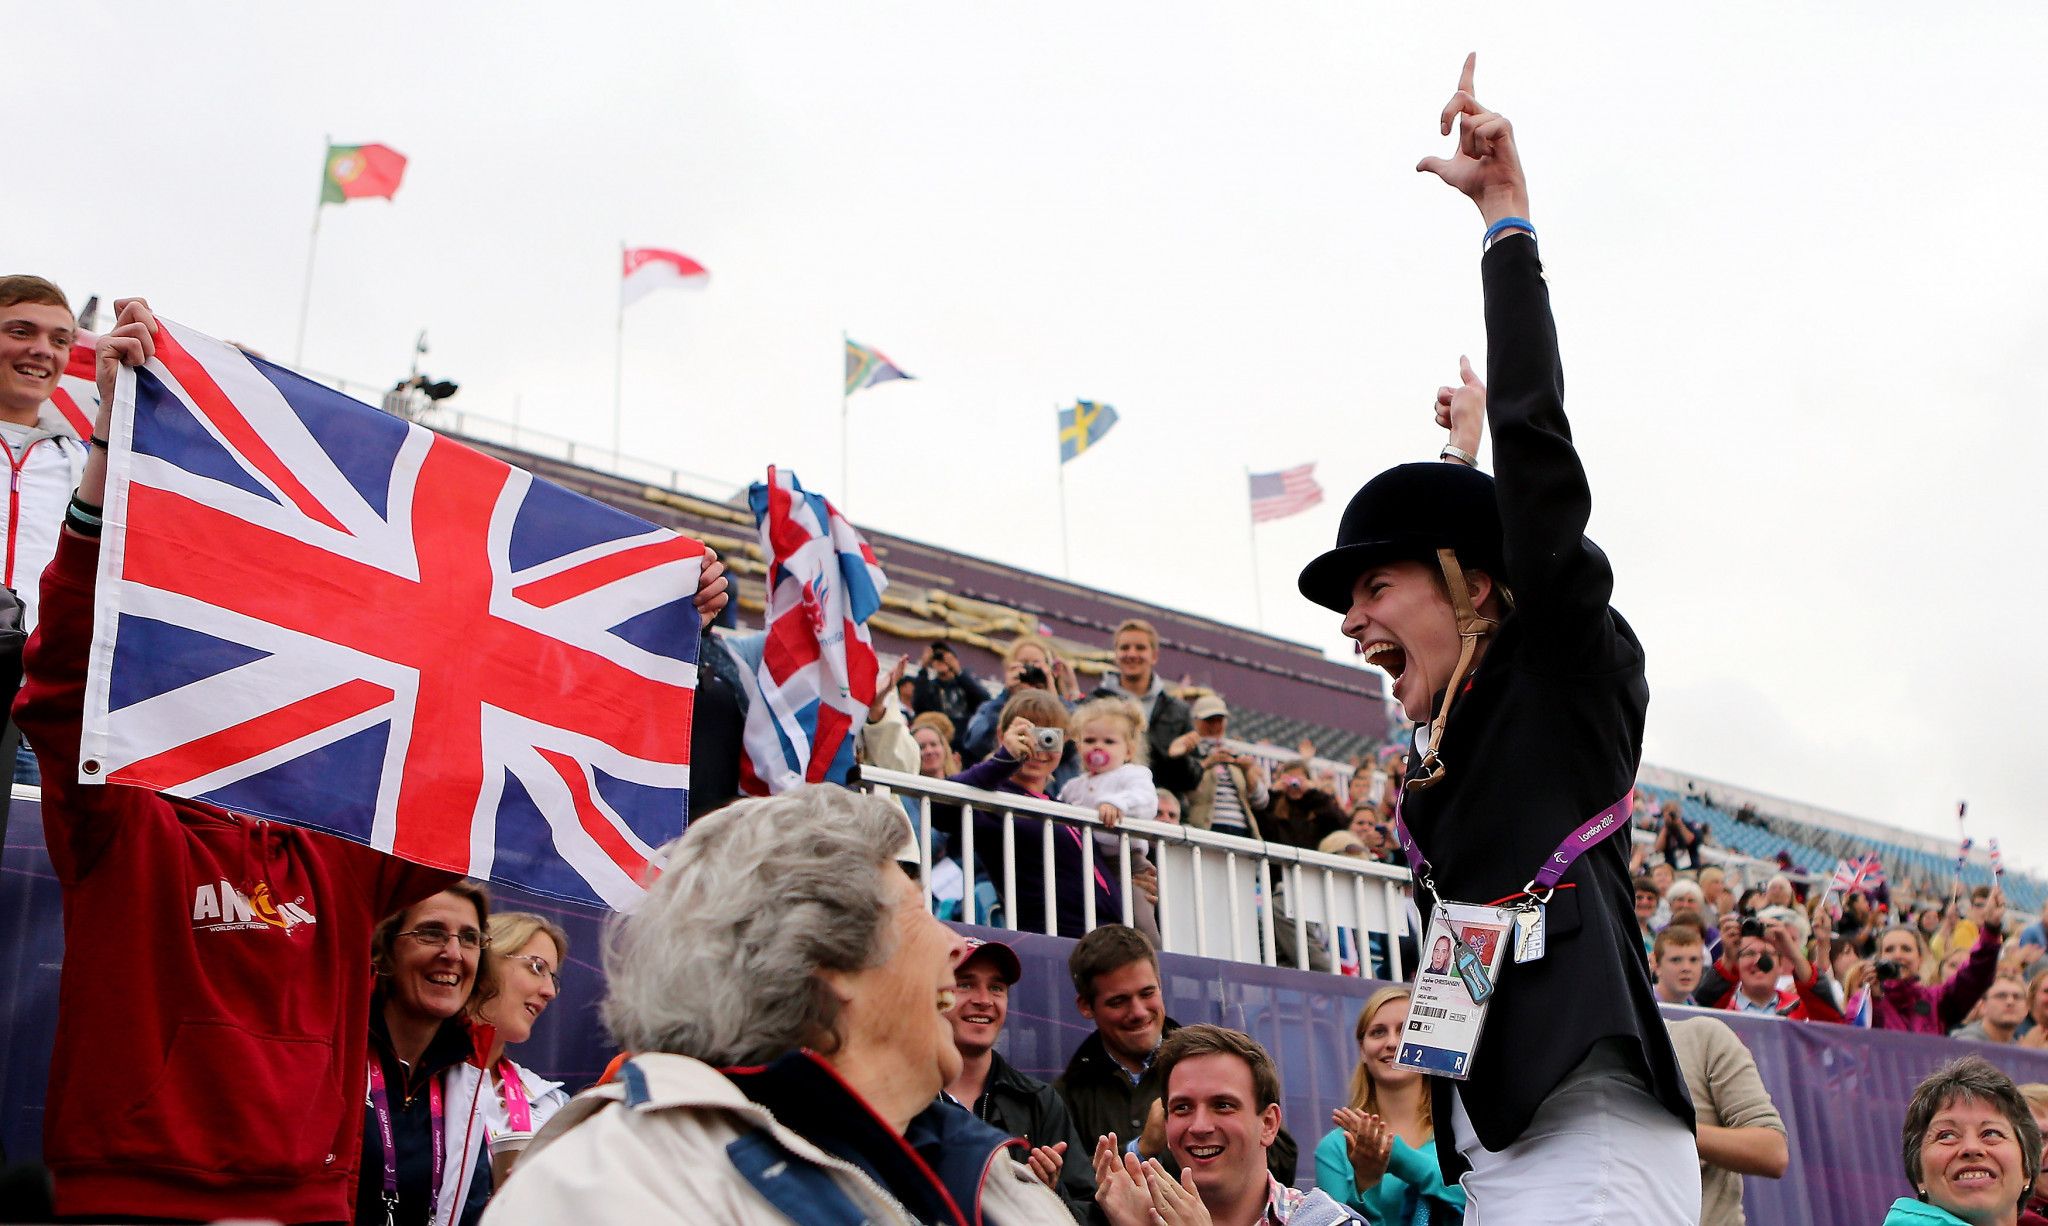 Sophie Christiansen celebrates winning the dressage gold medal at the London 2012 Paralympic Games ©Getty Images 

